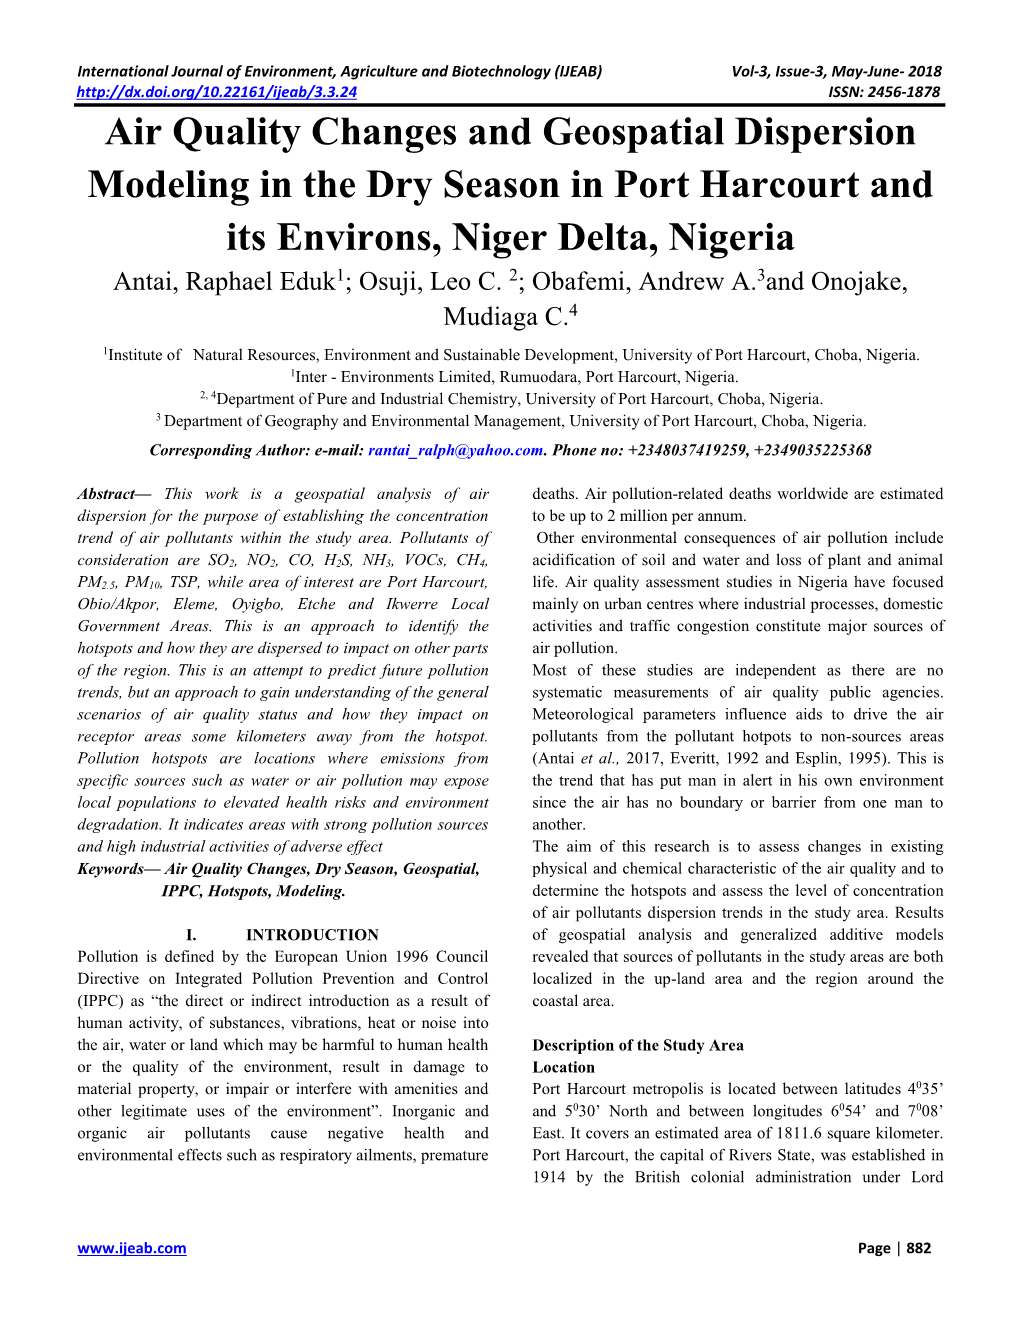 Air Quality Changes and Geospatial Dispersion Modeling in the Dry Season in Port Harcourt and Its Environs, Niger Delta, Nigeria Antai, Raphael Eduk1; Osuji, Leo C